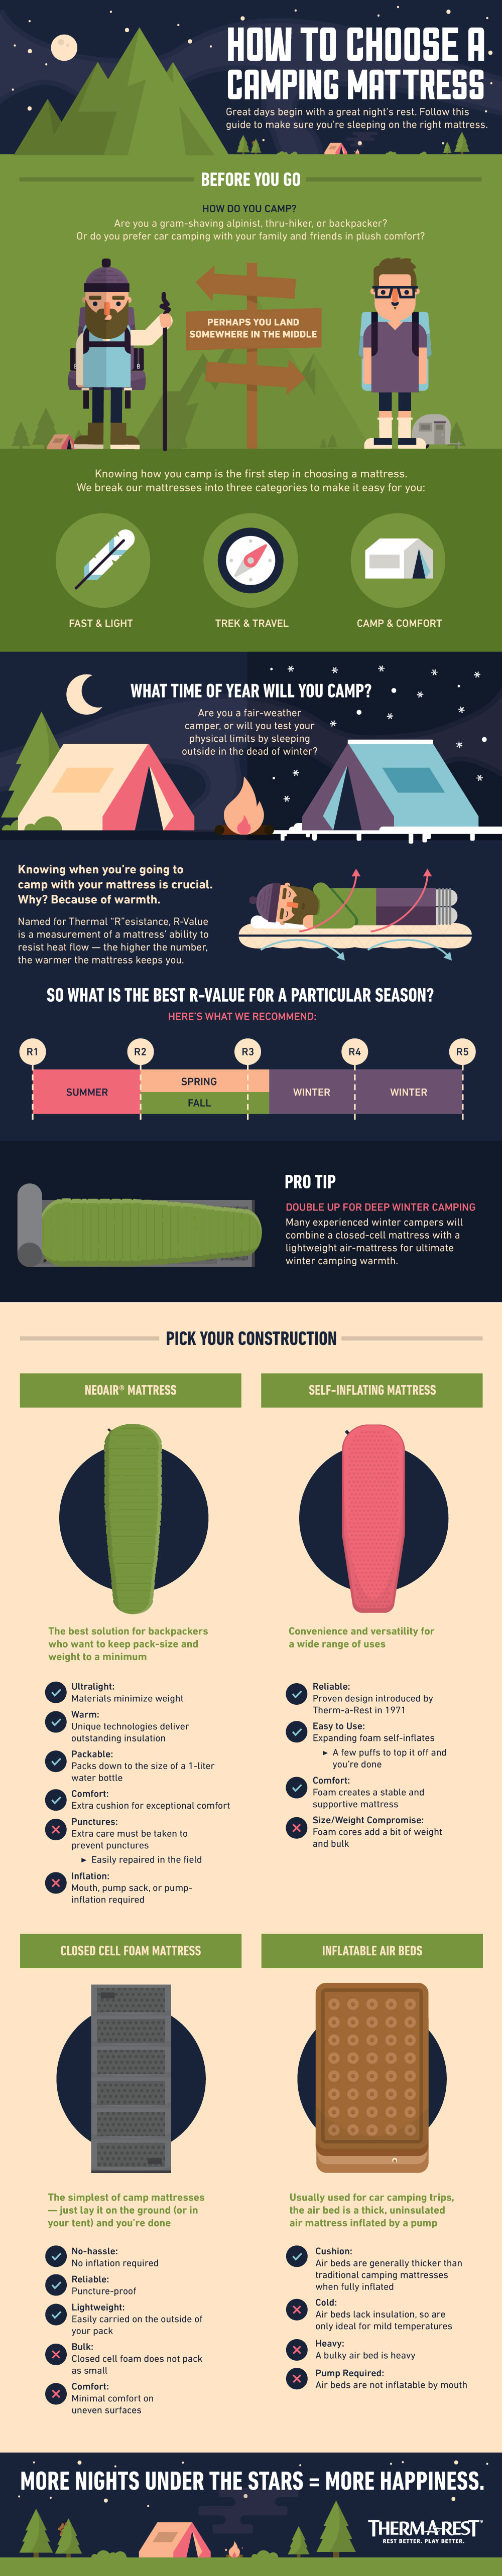 How to choose a sleeping pad infographic